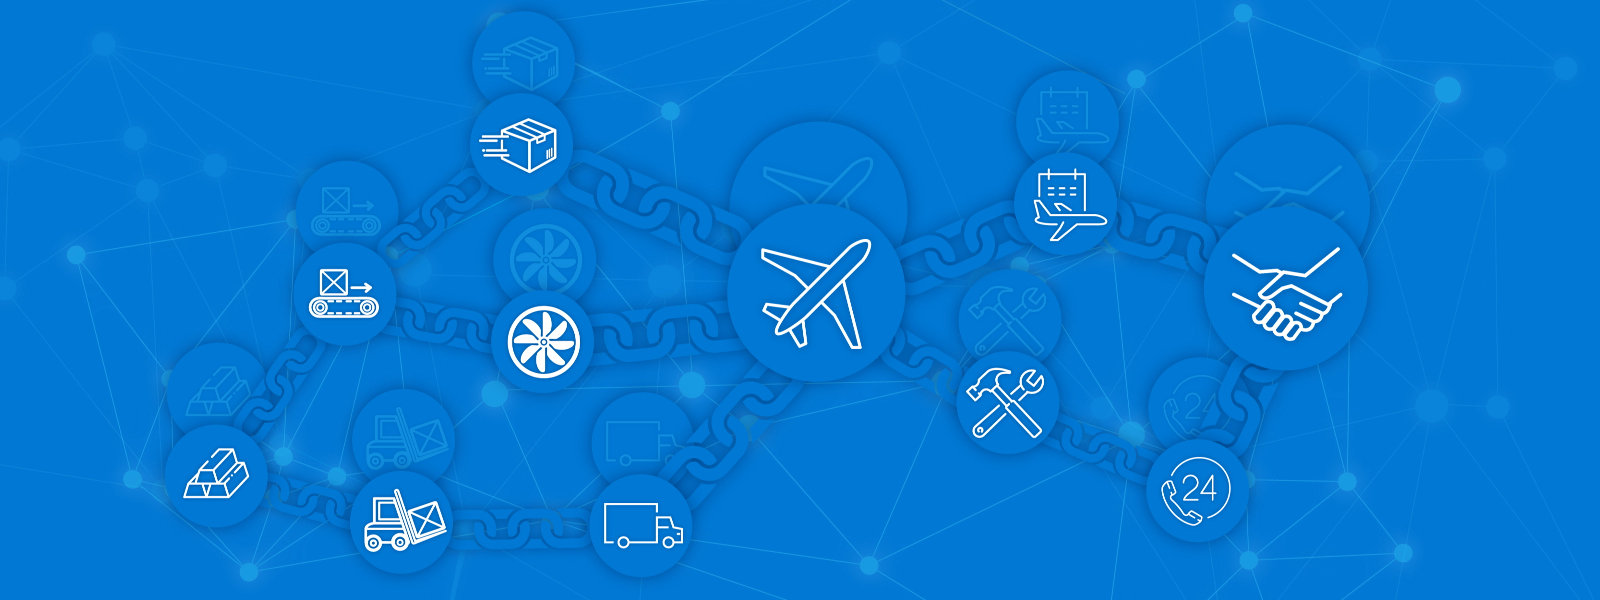 In the picture you can see a supply chain with various symbols is shown on a blue background.